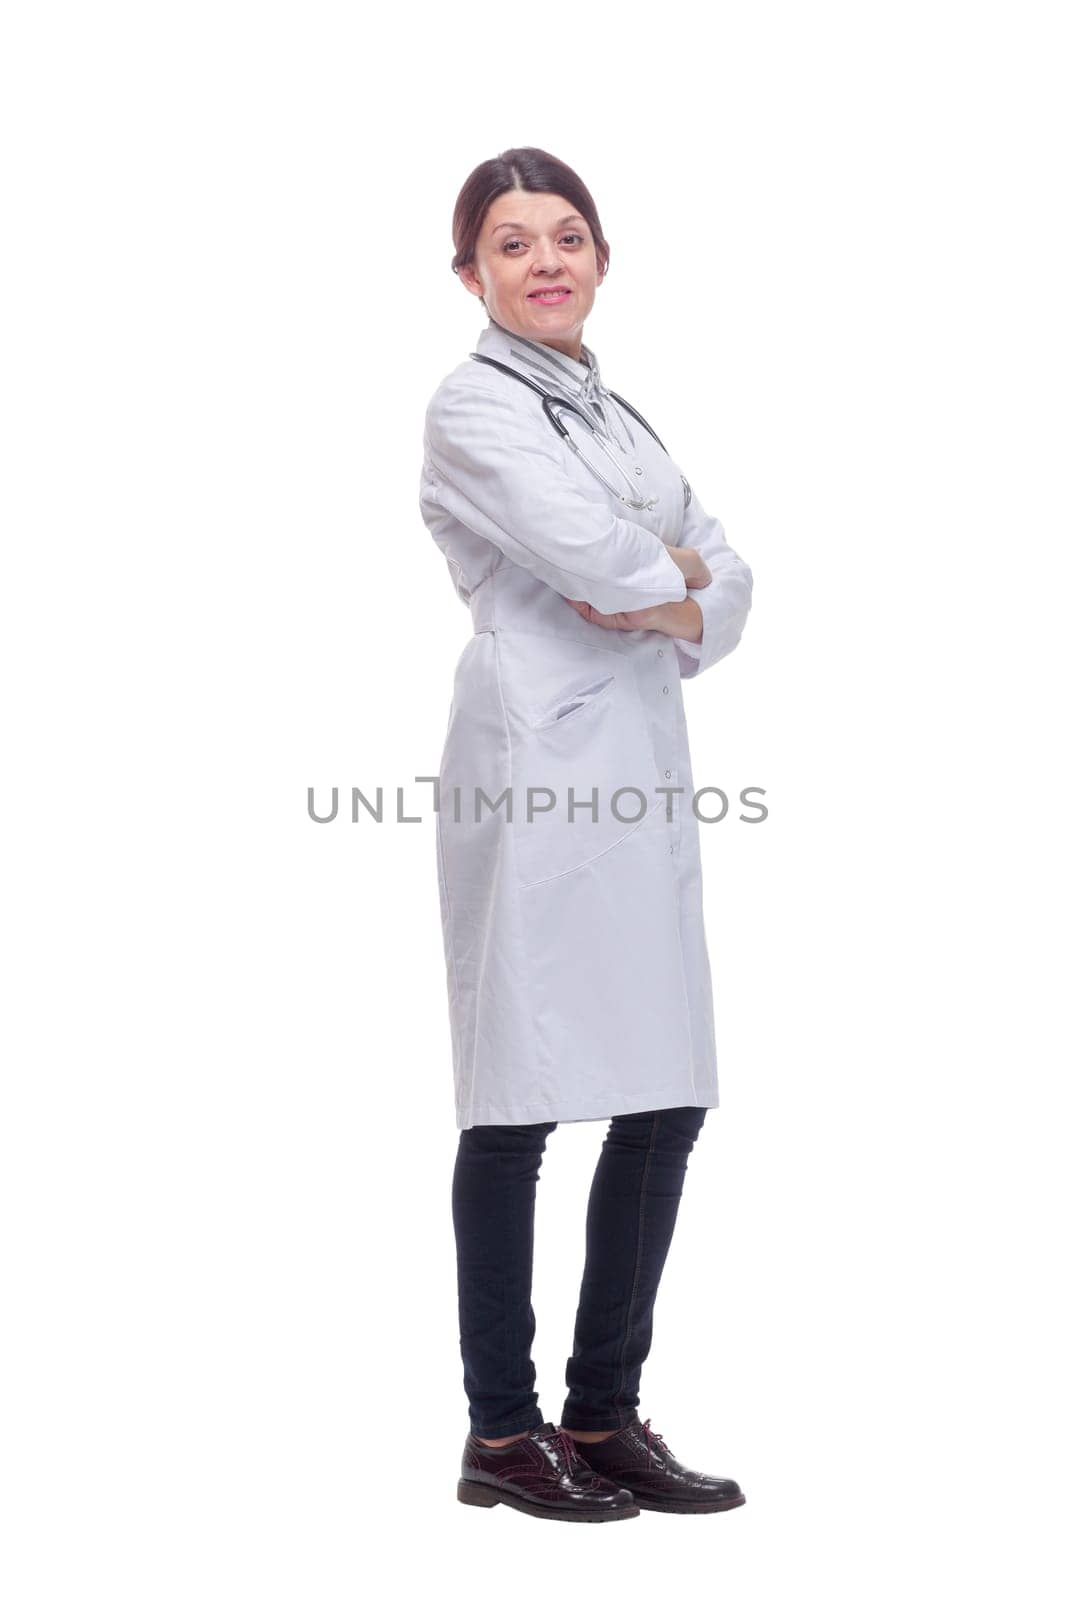 Female doctor full body side view on white background with stethoscope